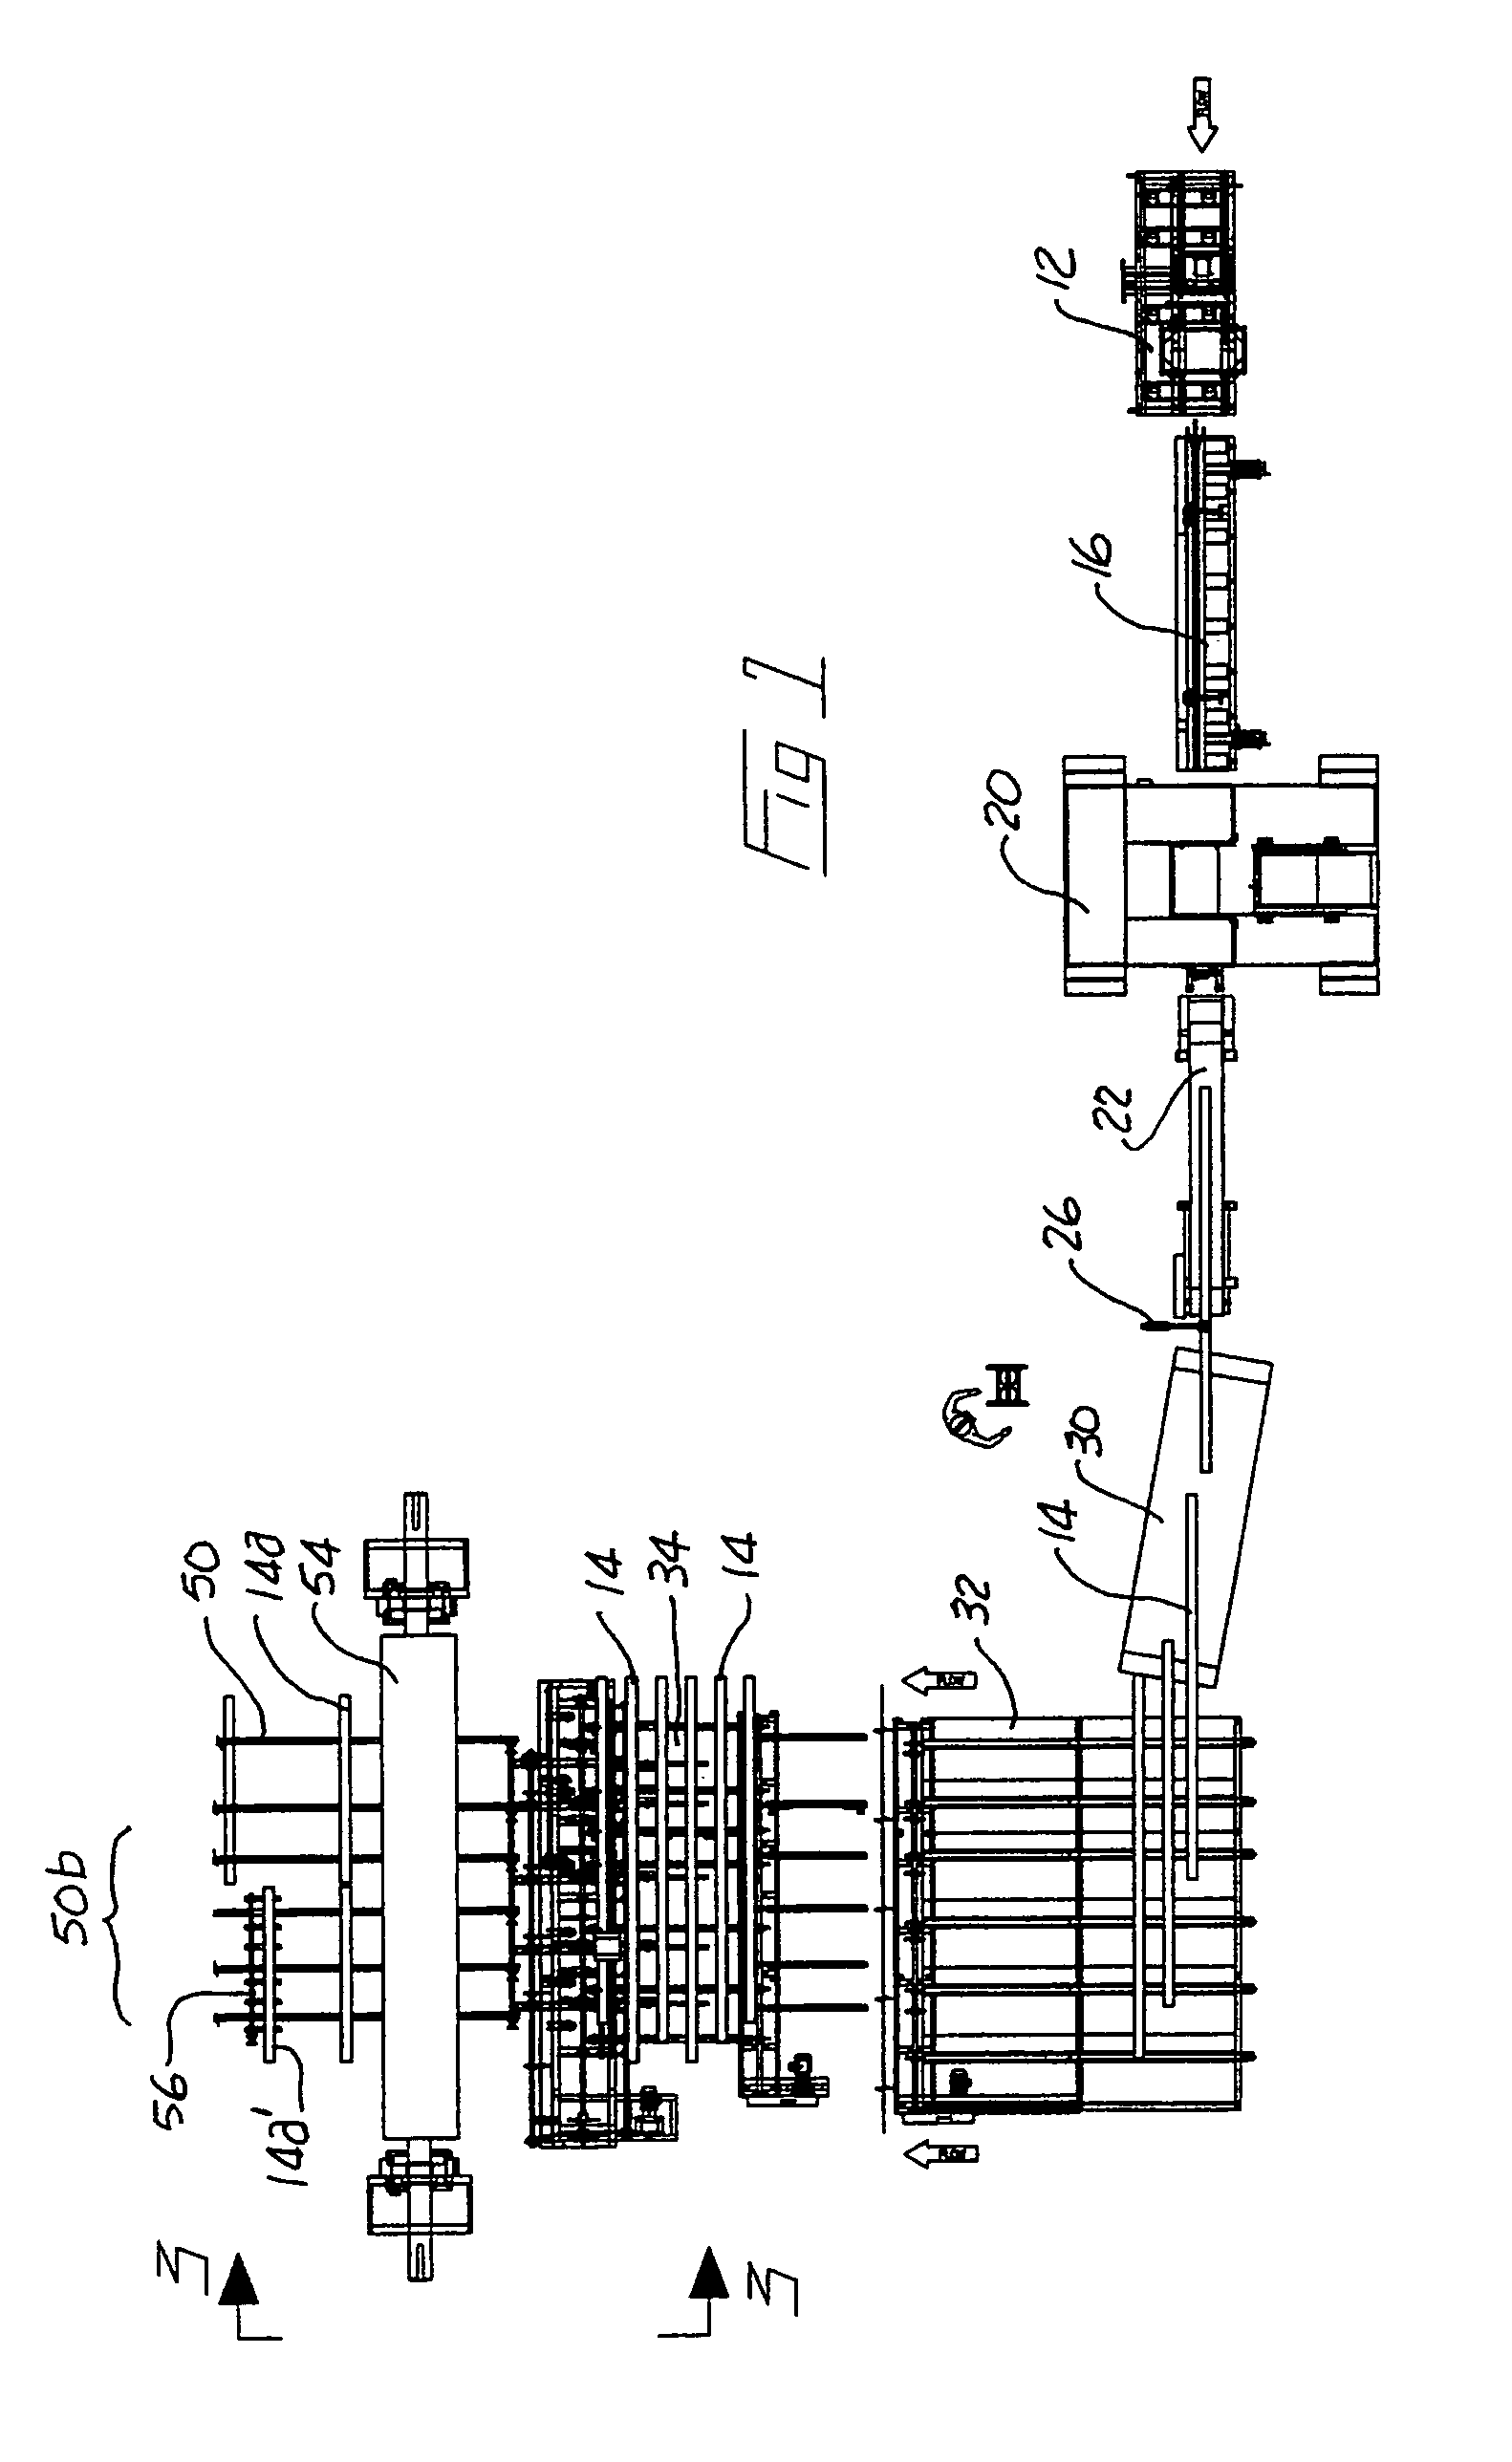 Process and apparatus for identifying, tracking and handling lumber to be cut-in-two